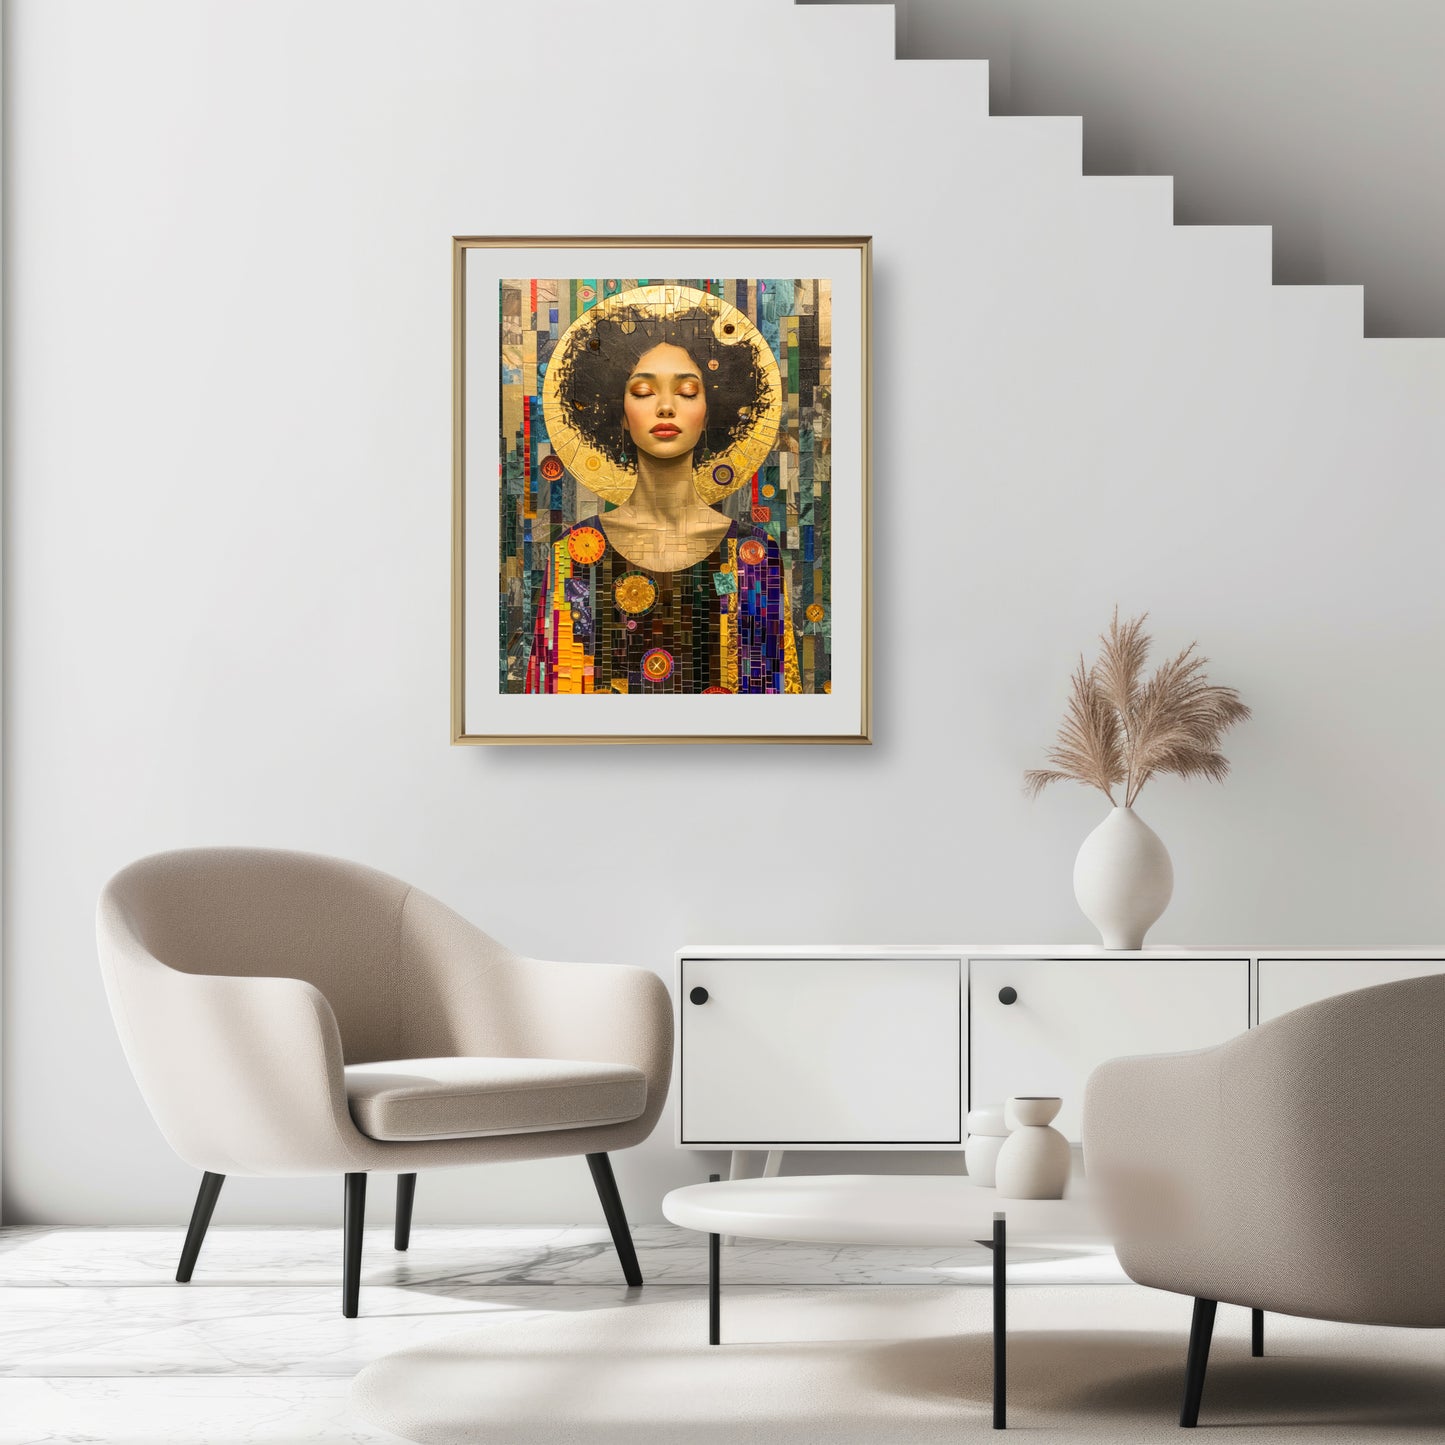 Art print of a woman with a golden halo and intricate mosaic background from the Heart Of Gold collection.